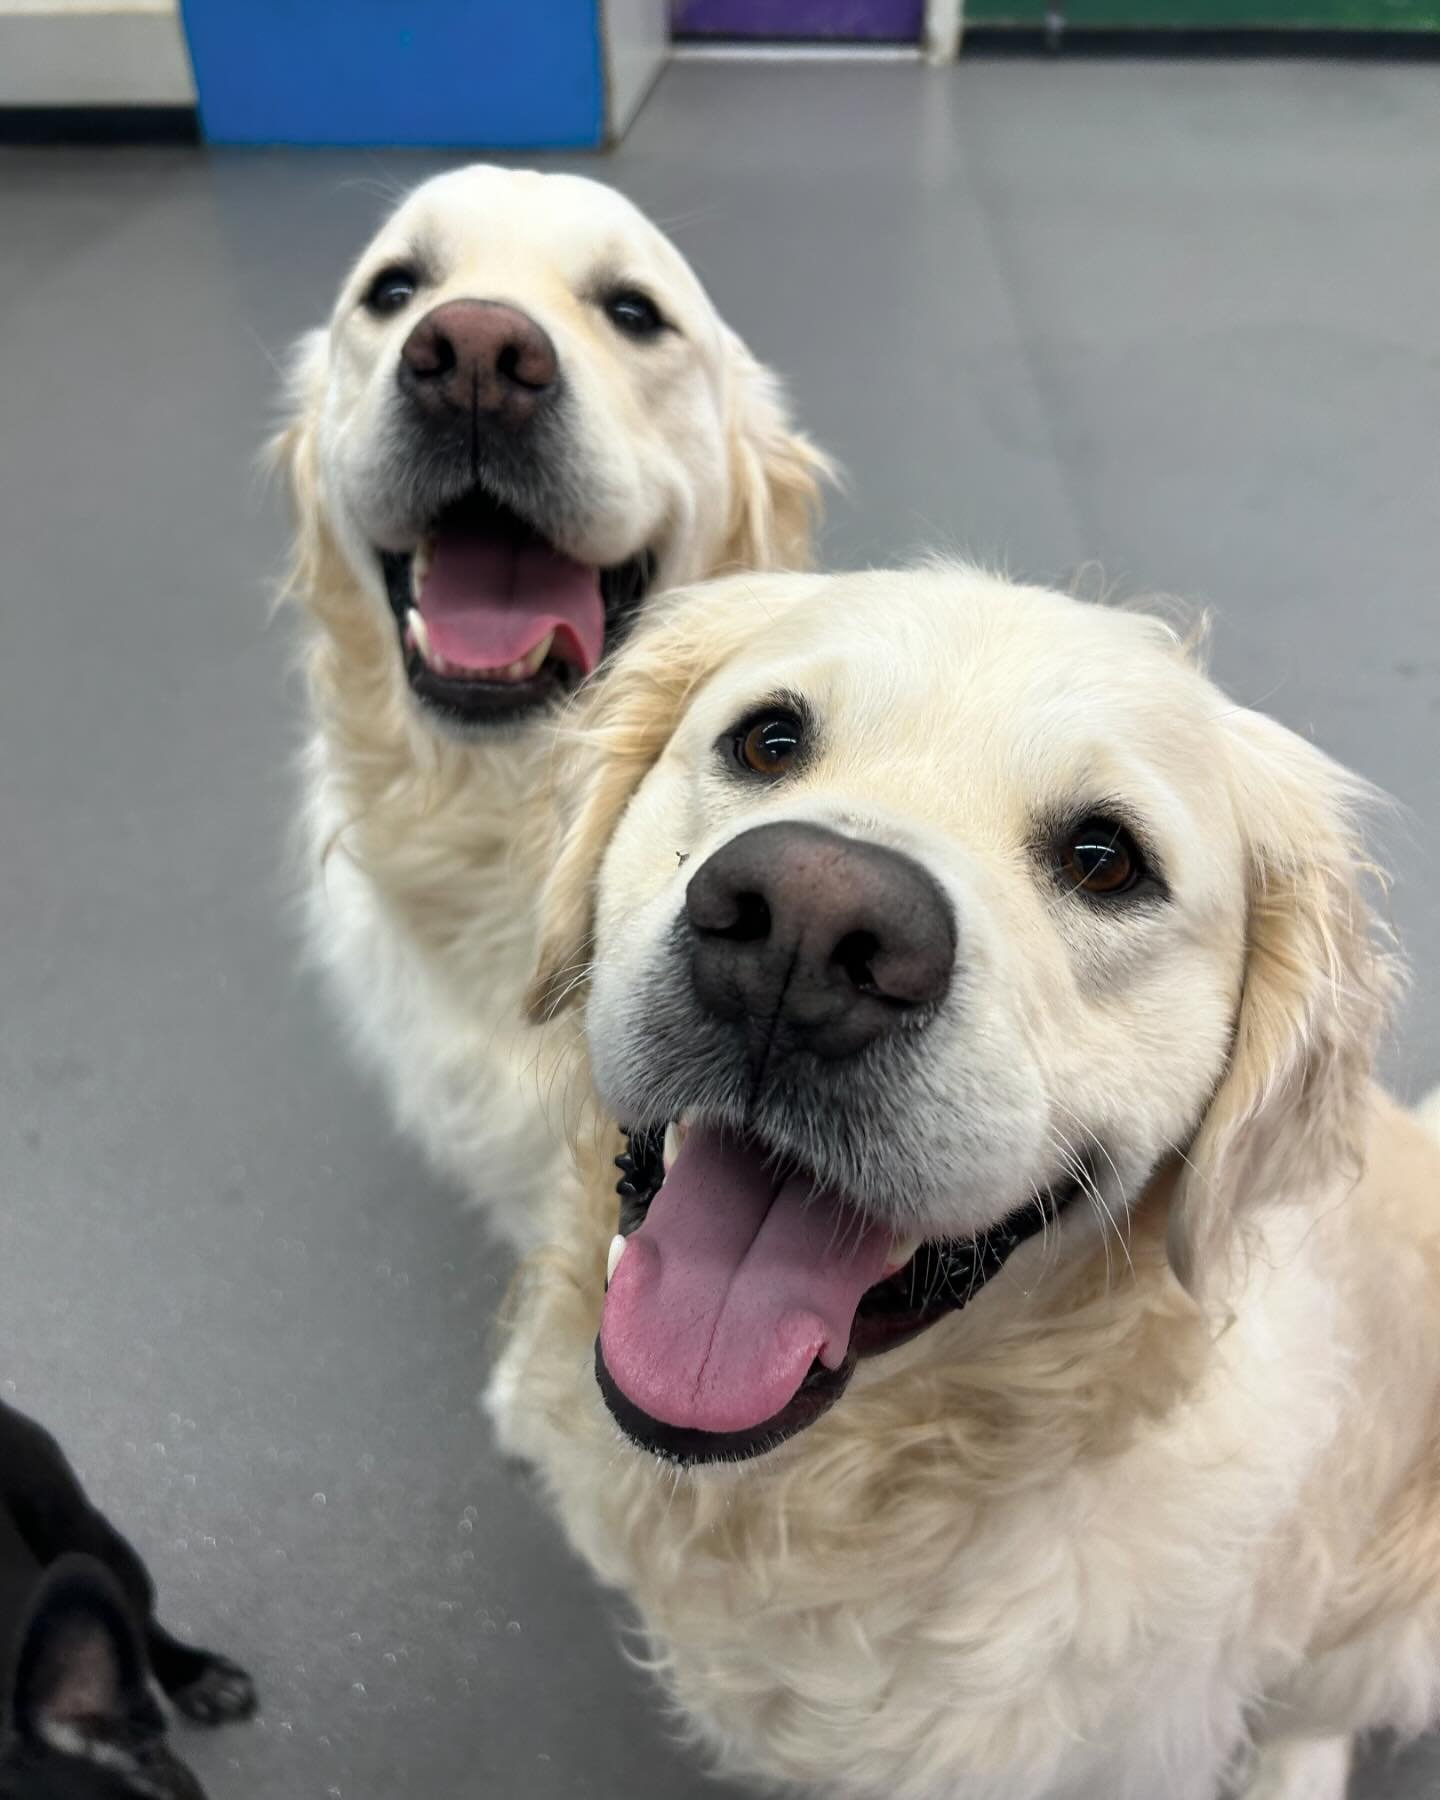 It&rsquo;s the weekend!! Call us today to make a reservation for hikes, boarding, daycare or grooming! 🥳❤️🐾 #ILoveDogs #SmallBusiness #Dog #Dogs #DoggyDaycare #DogDaycare #DoggieDaycare #DaycareLife #DogHotel #PDXDogs #PortlandDogs #DogsOfPortland 